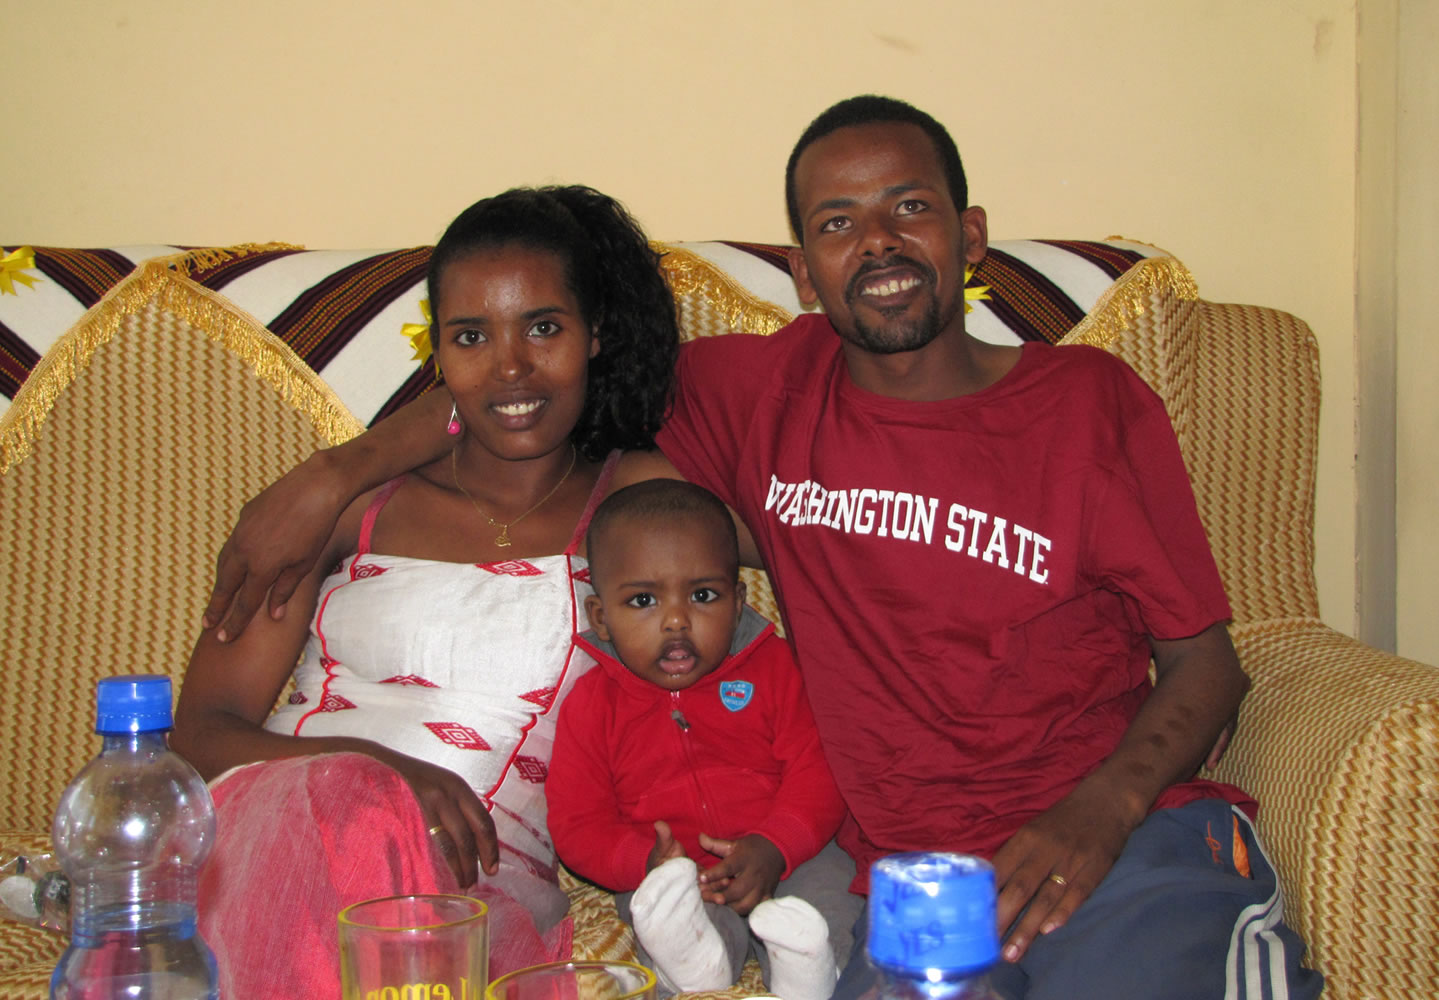 Barry Hewlett's Ethiopian doctoral student, Samuel Dira, and his wife and child.